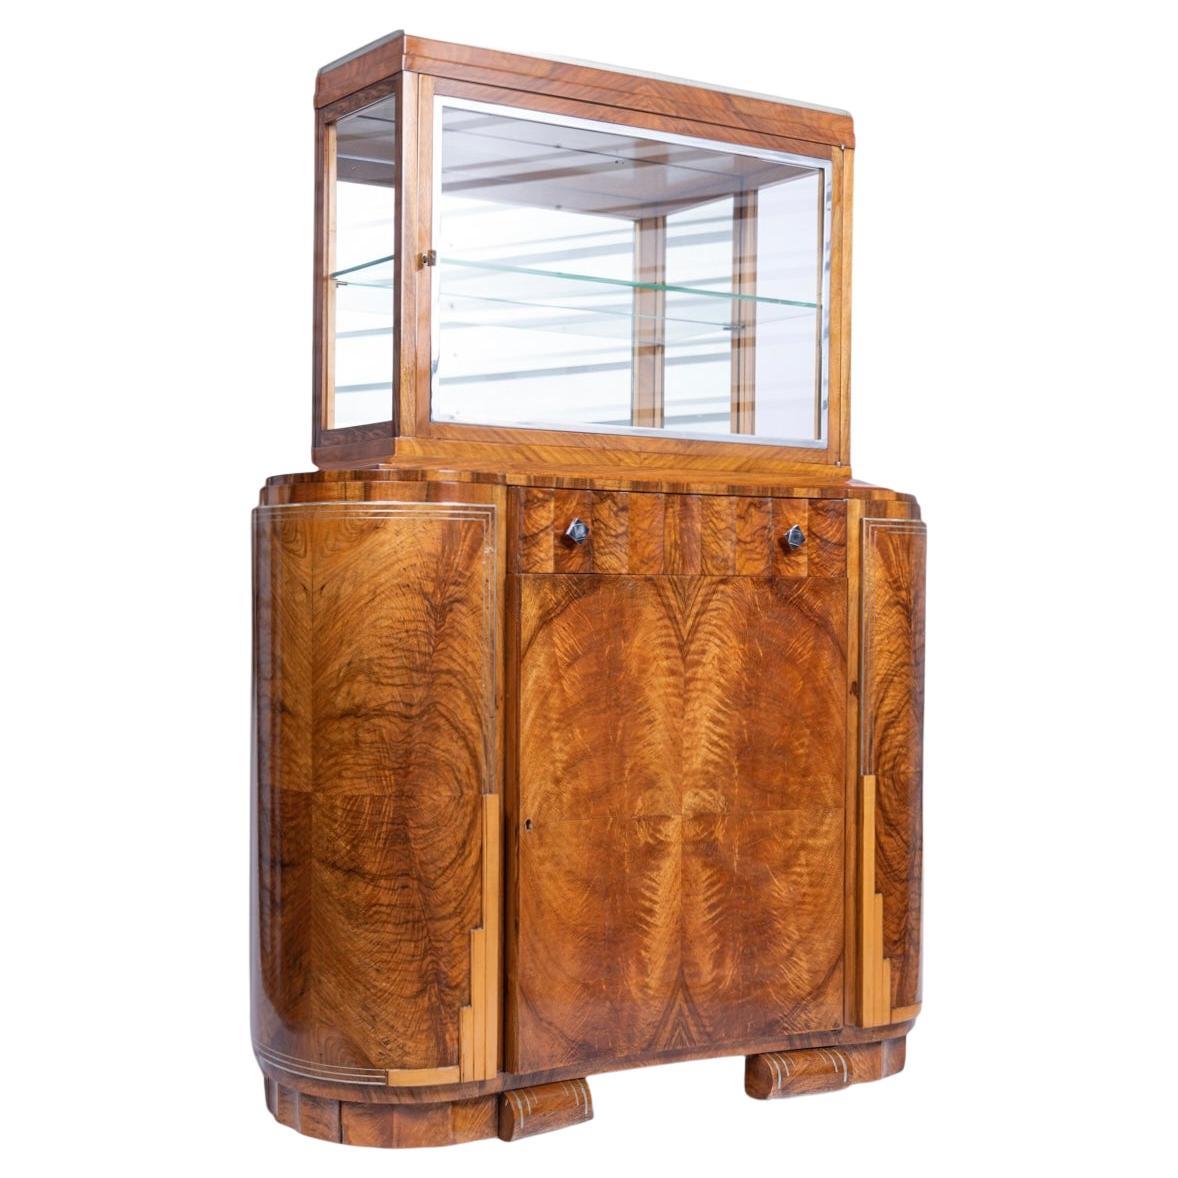 1930s Antique French Art Deco Burl Wood and Glass Display Bar Cabinet